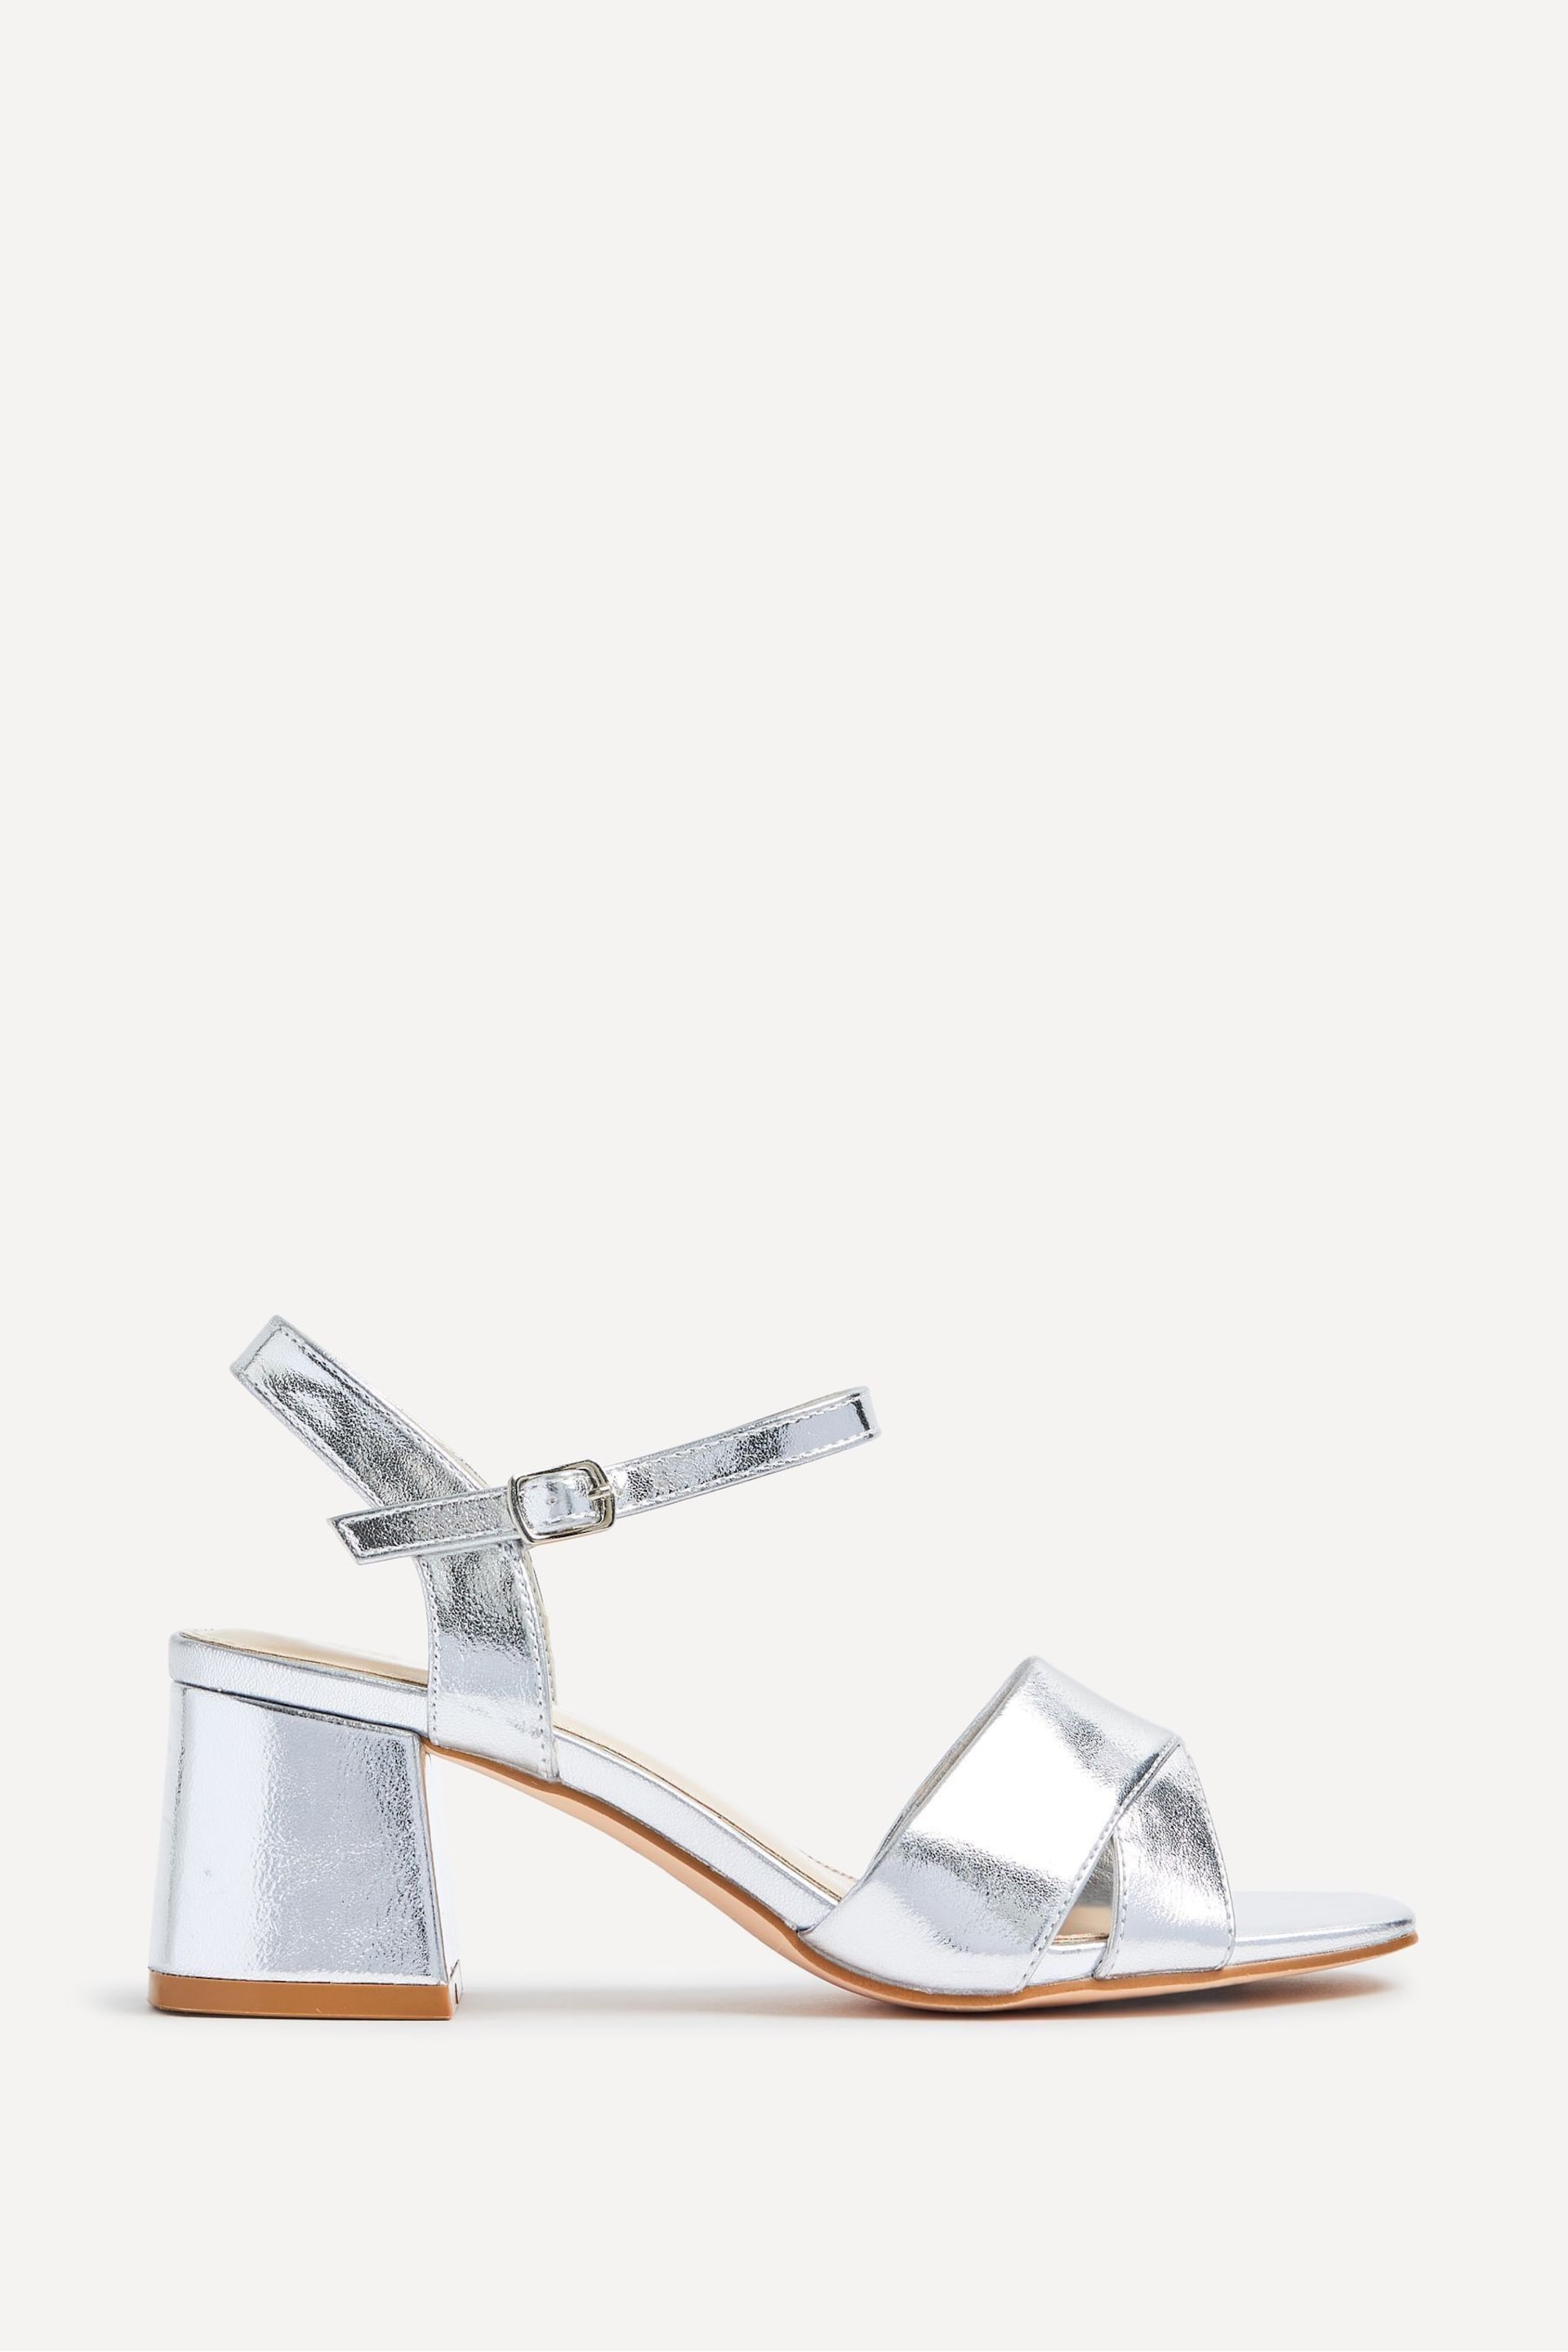 Linzi Silver Vivian Wide Fit Heeled Sandals With Crossover Front Strap - Image 2 of 5